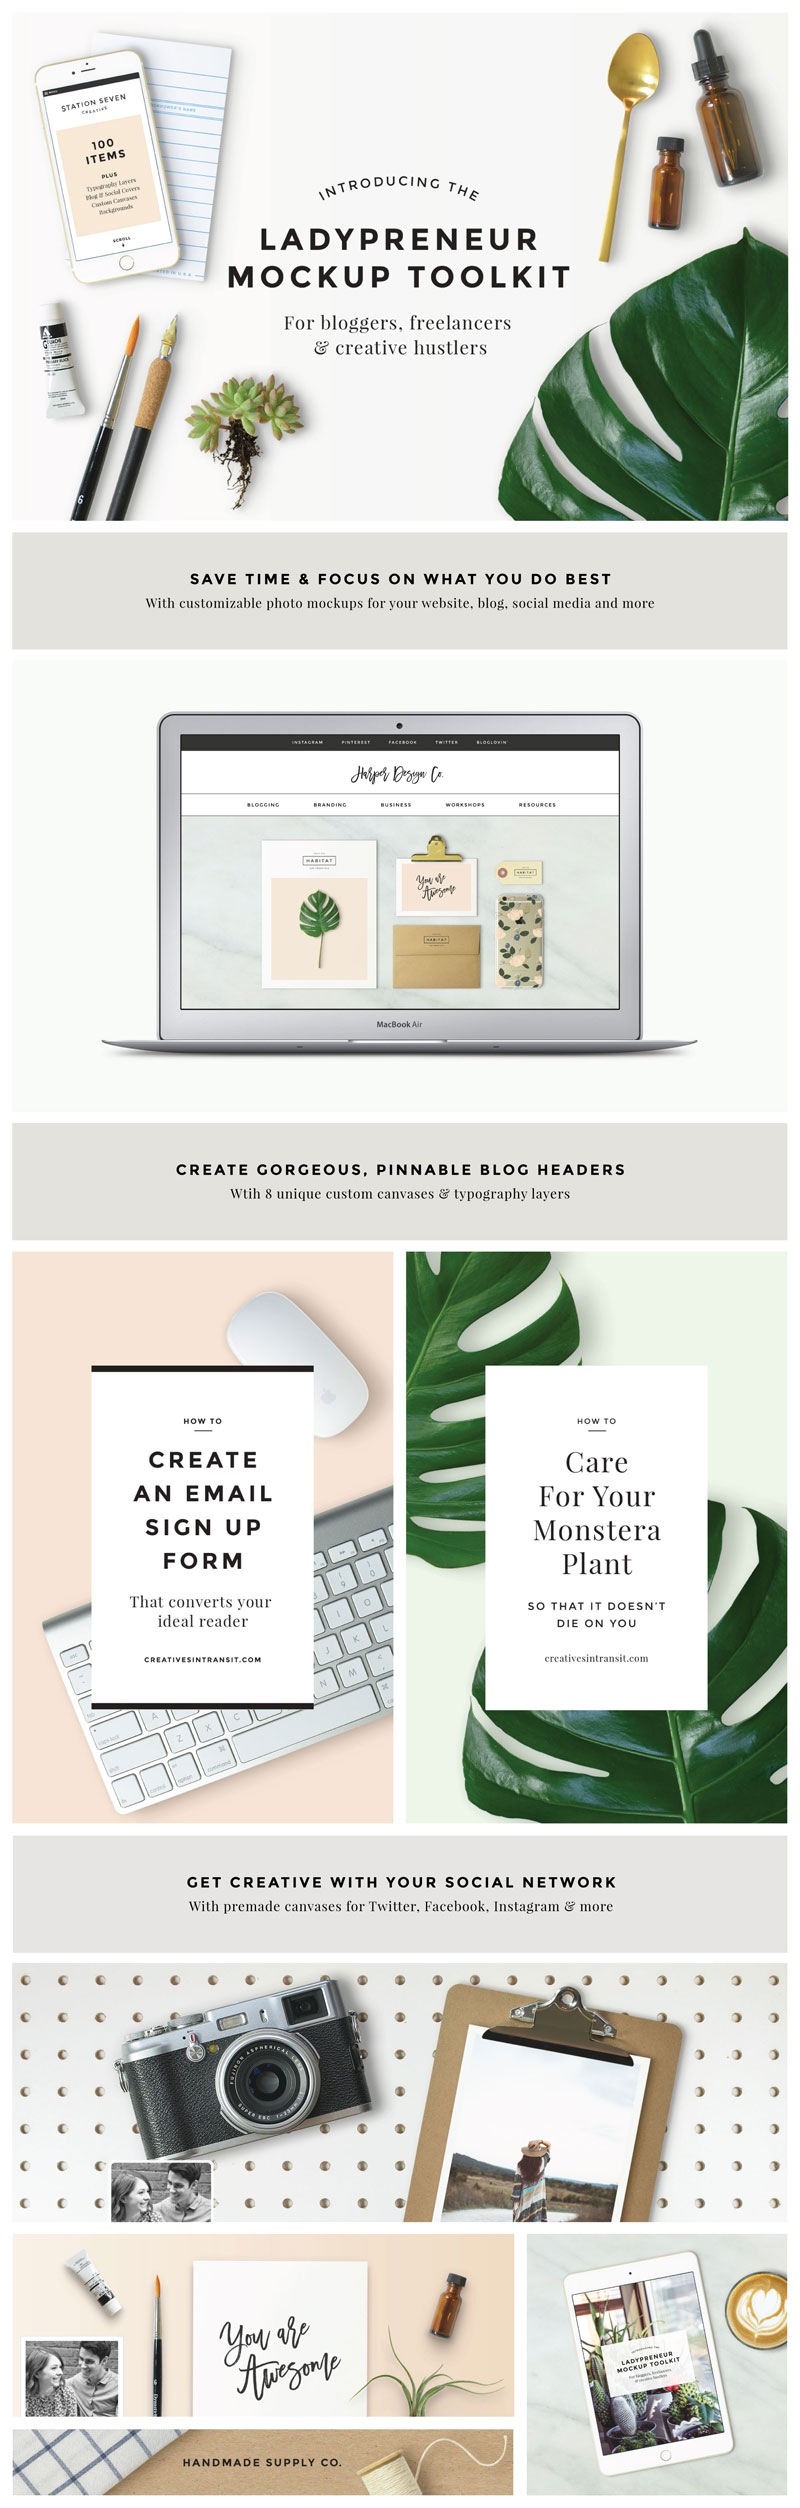 The Ladypreneur Mockup Creator Toolkit from Station Seven.